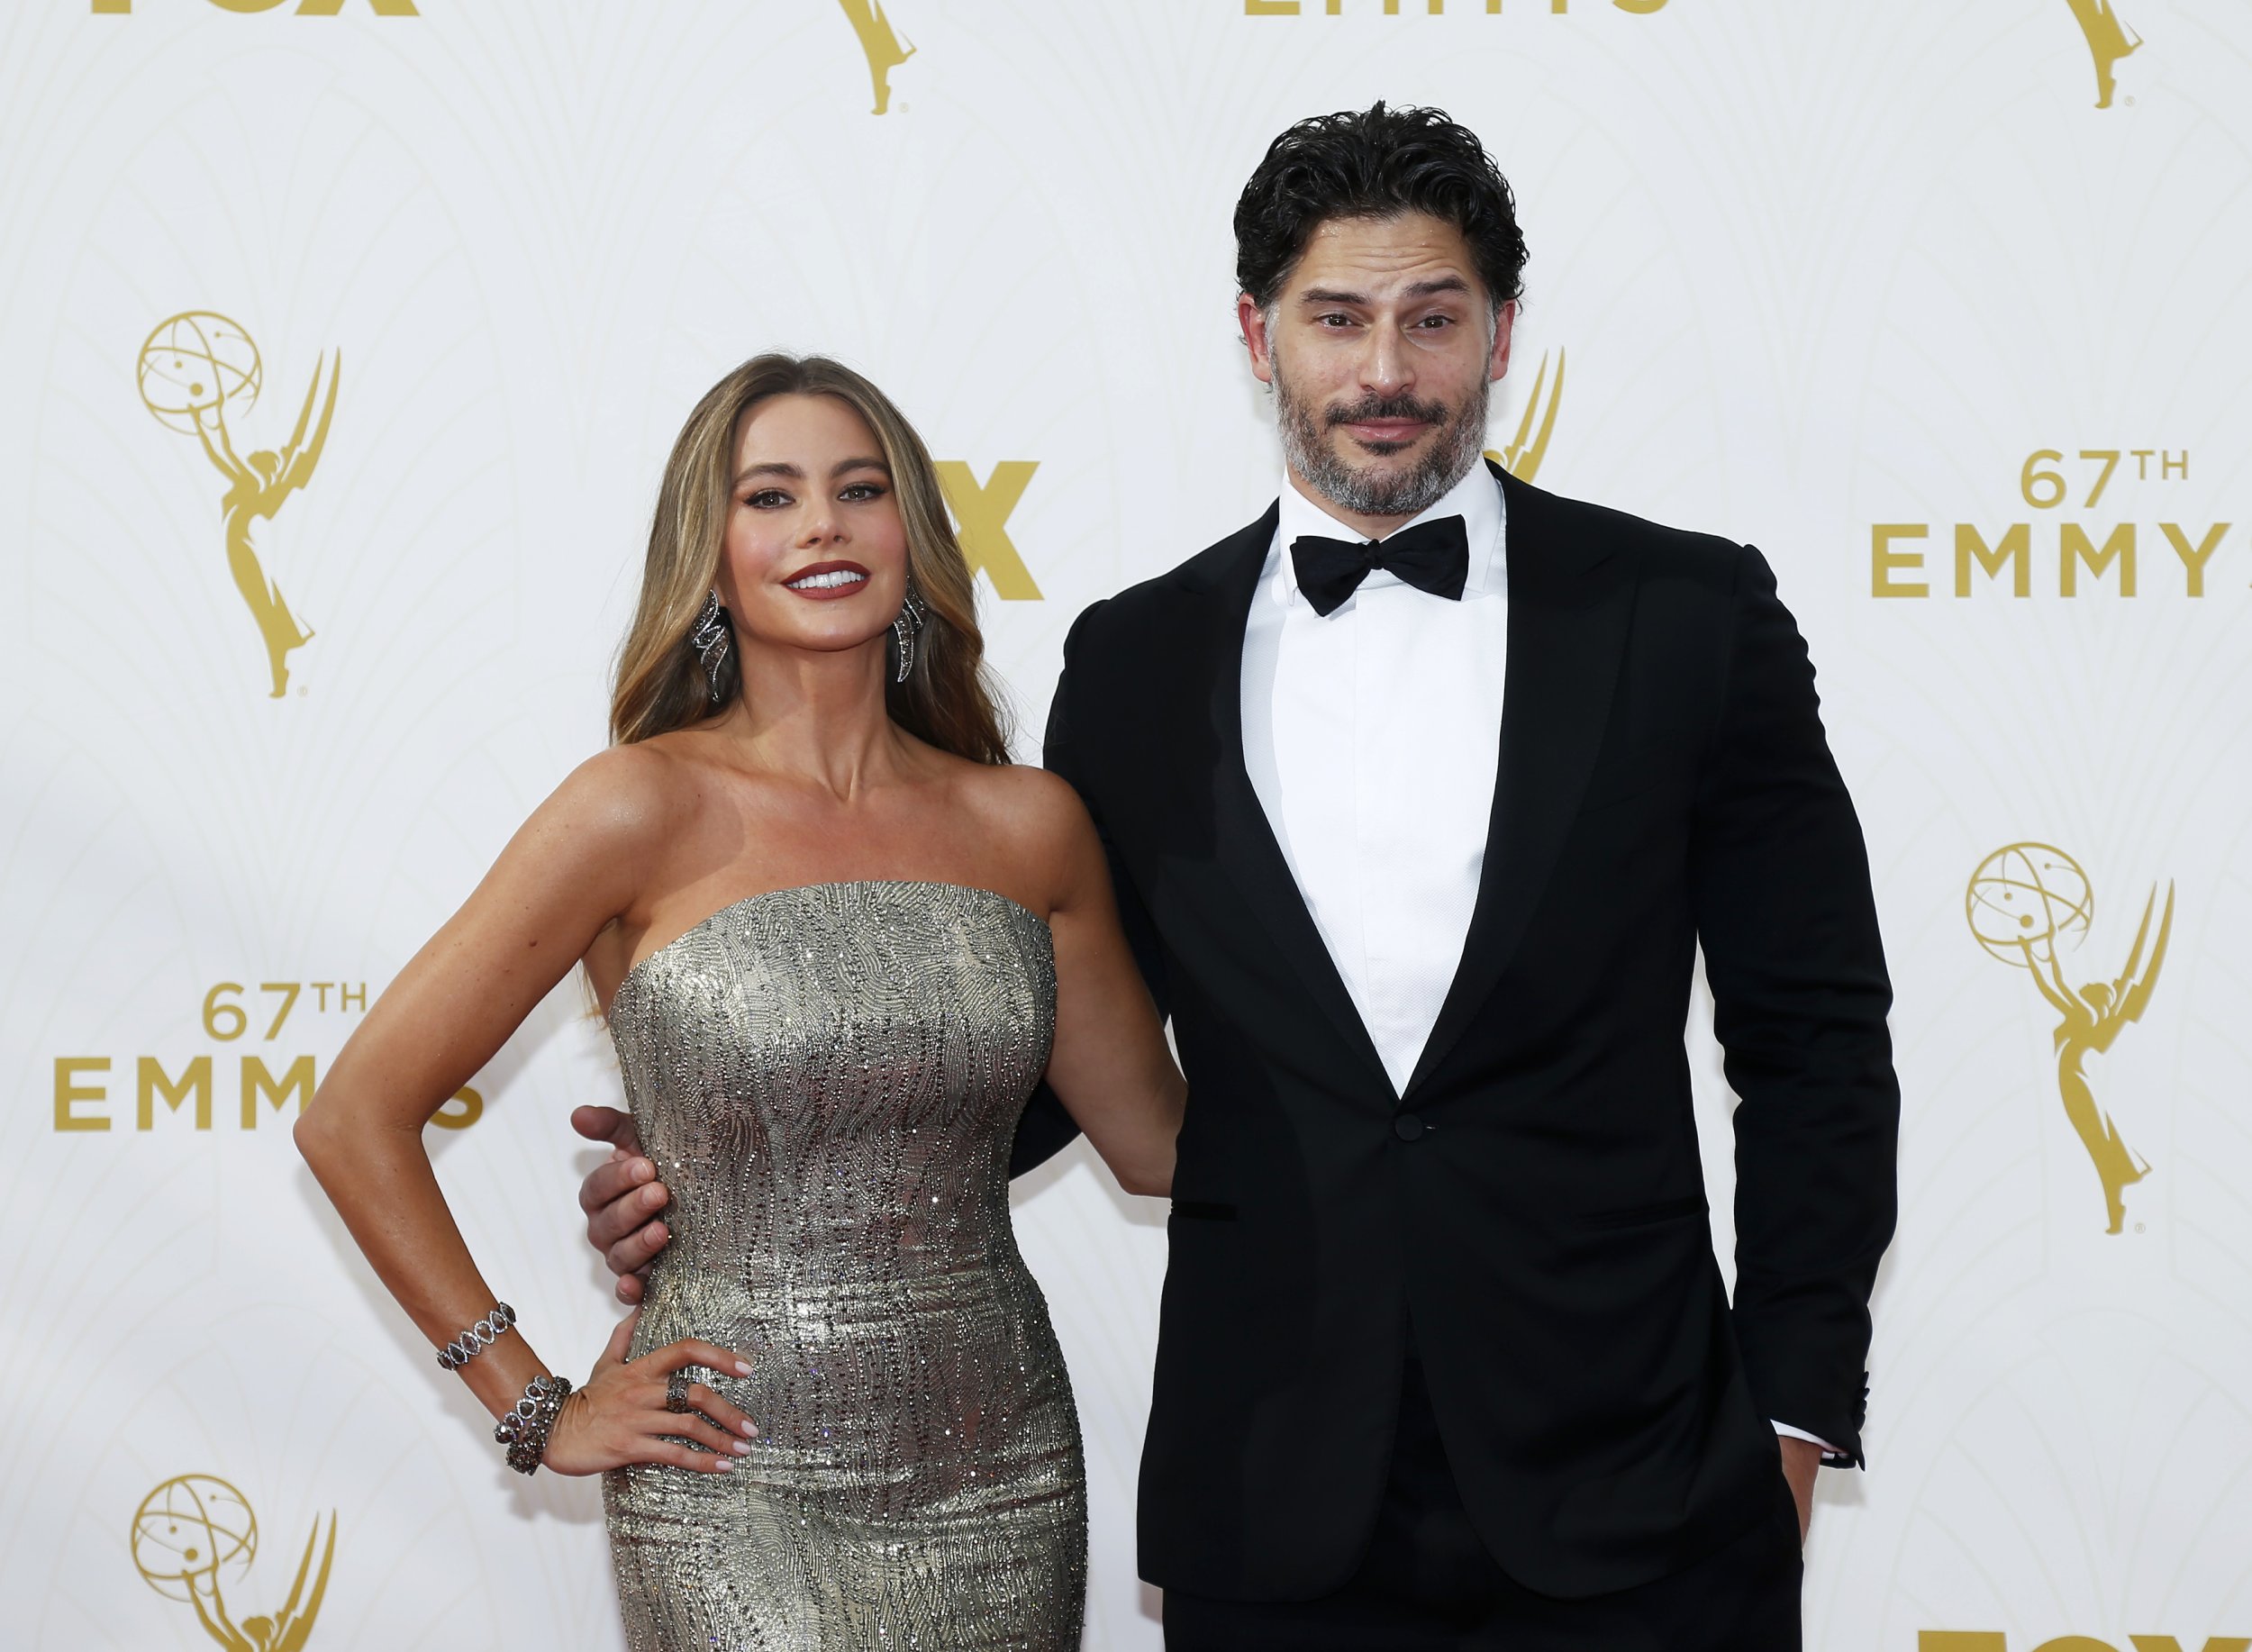 What will happen to Sophia Vergara's assets after her divorce from Joe  Manganiello?